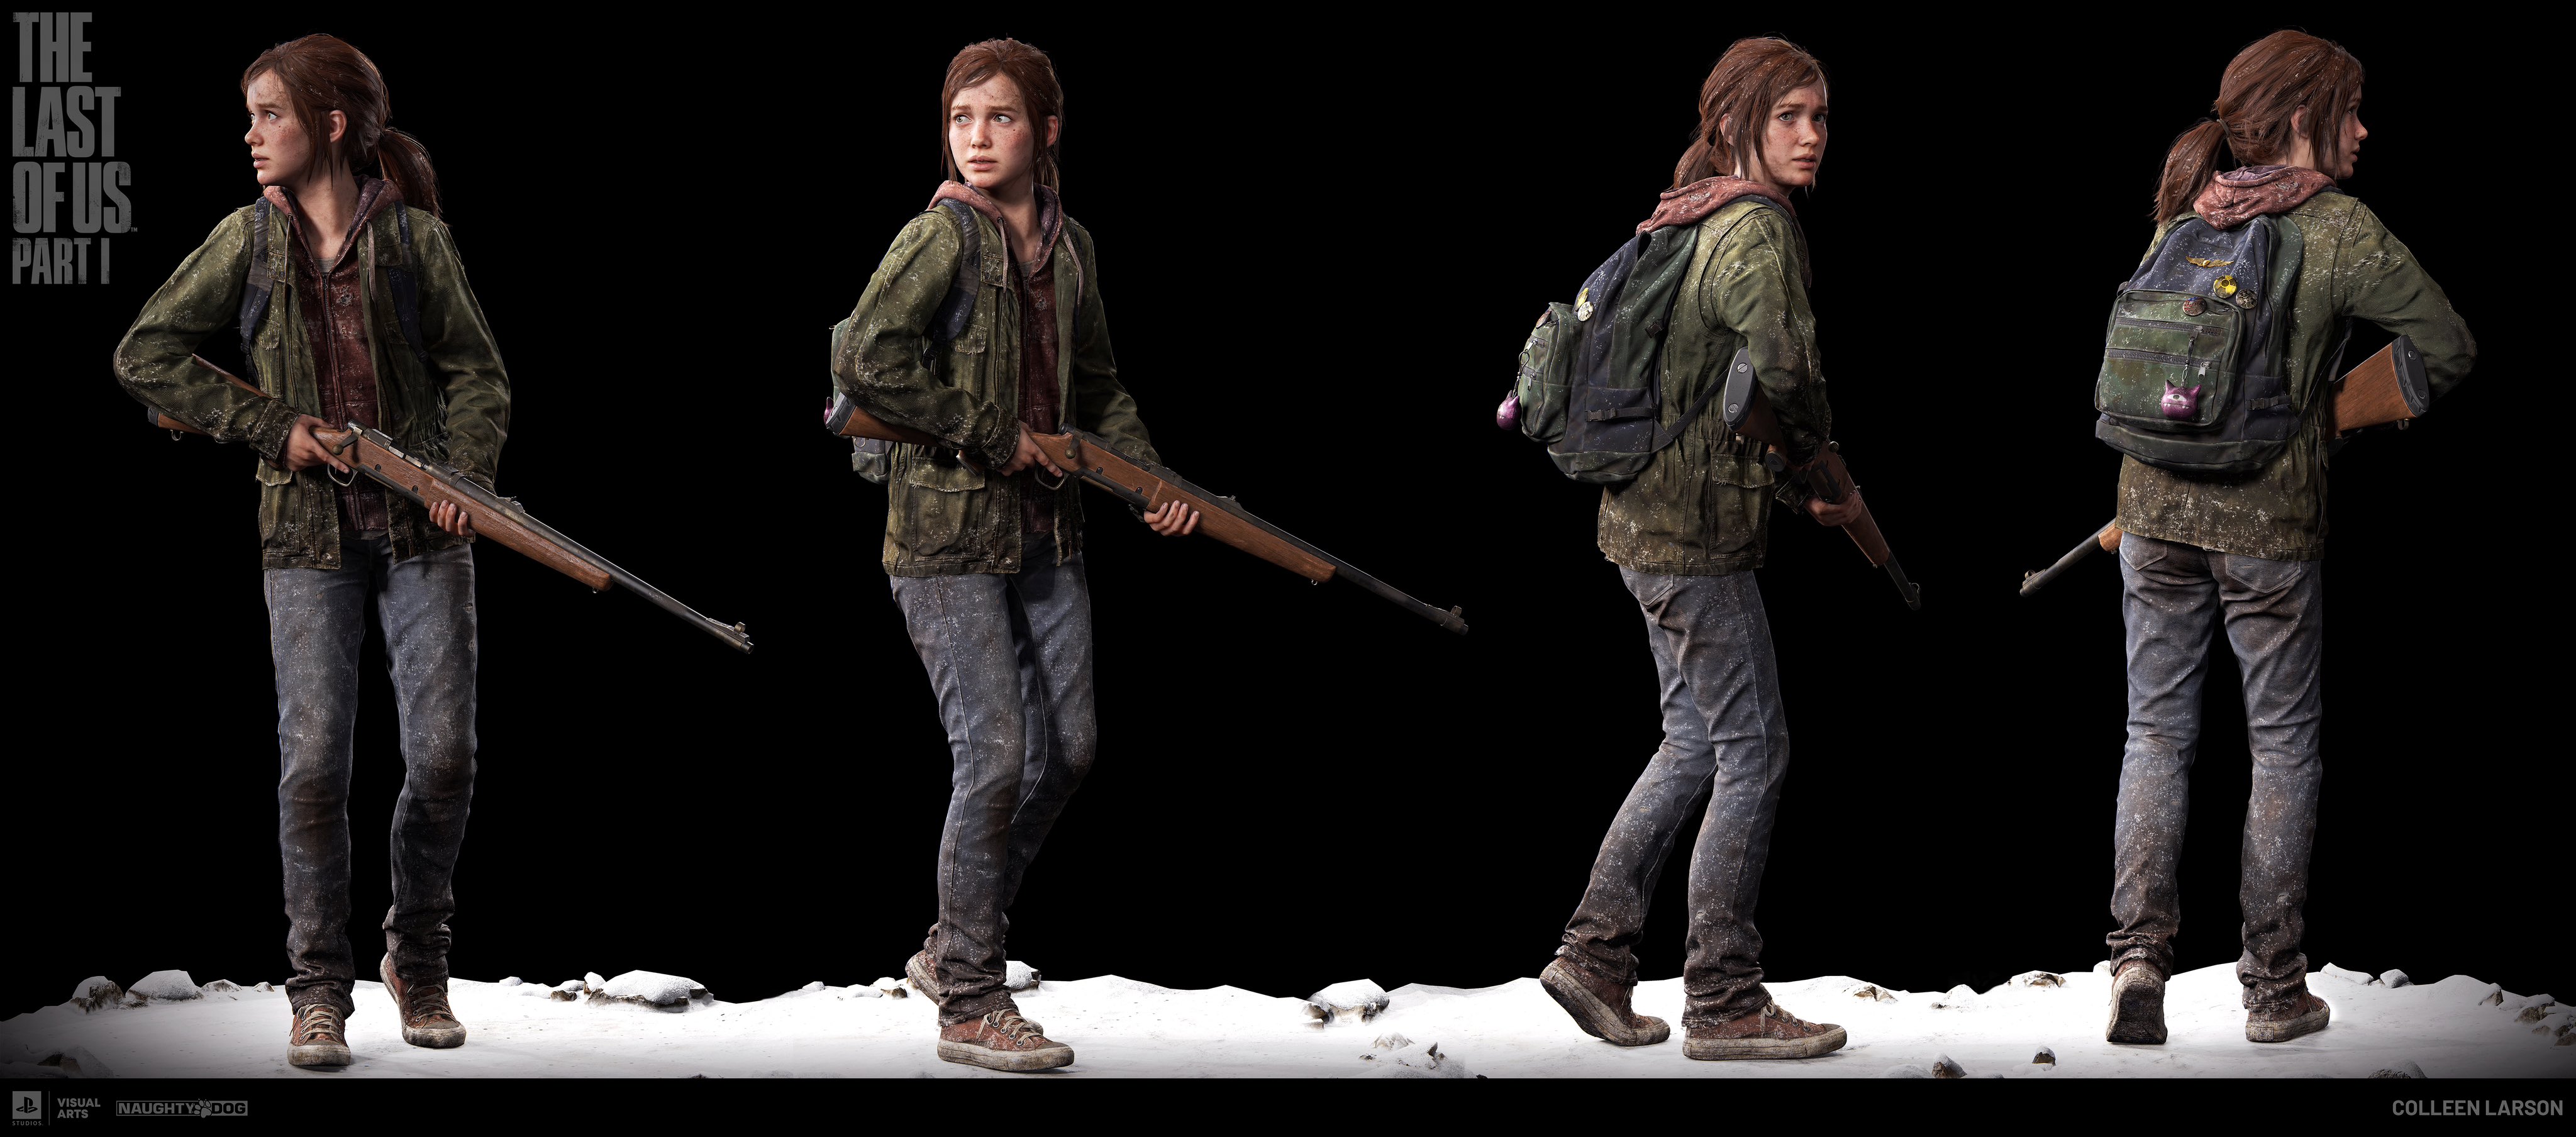 TangledWires}: Ellie The Last of Us 2 Costume Reference Guide